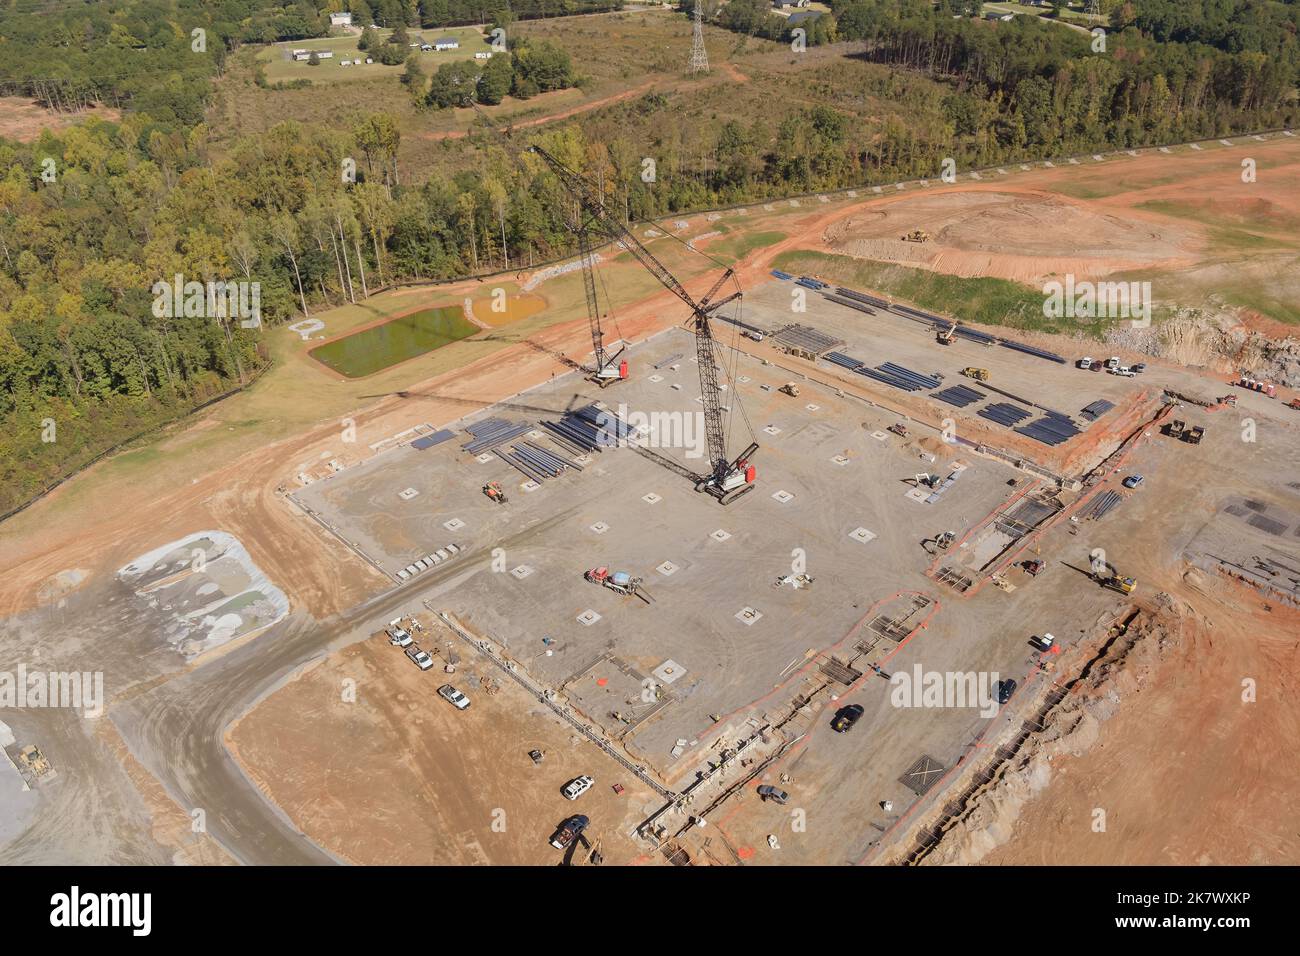 An aerial view of high rise cranes working on construction site of high rise building Stock Photo